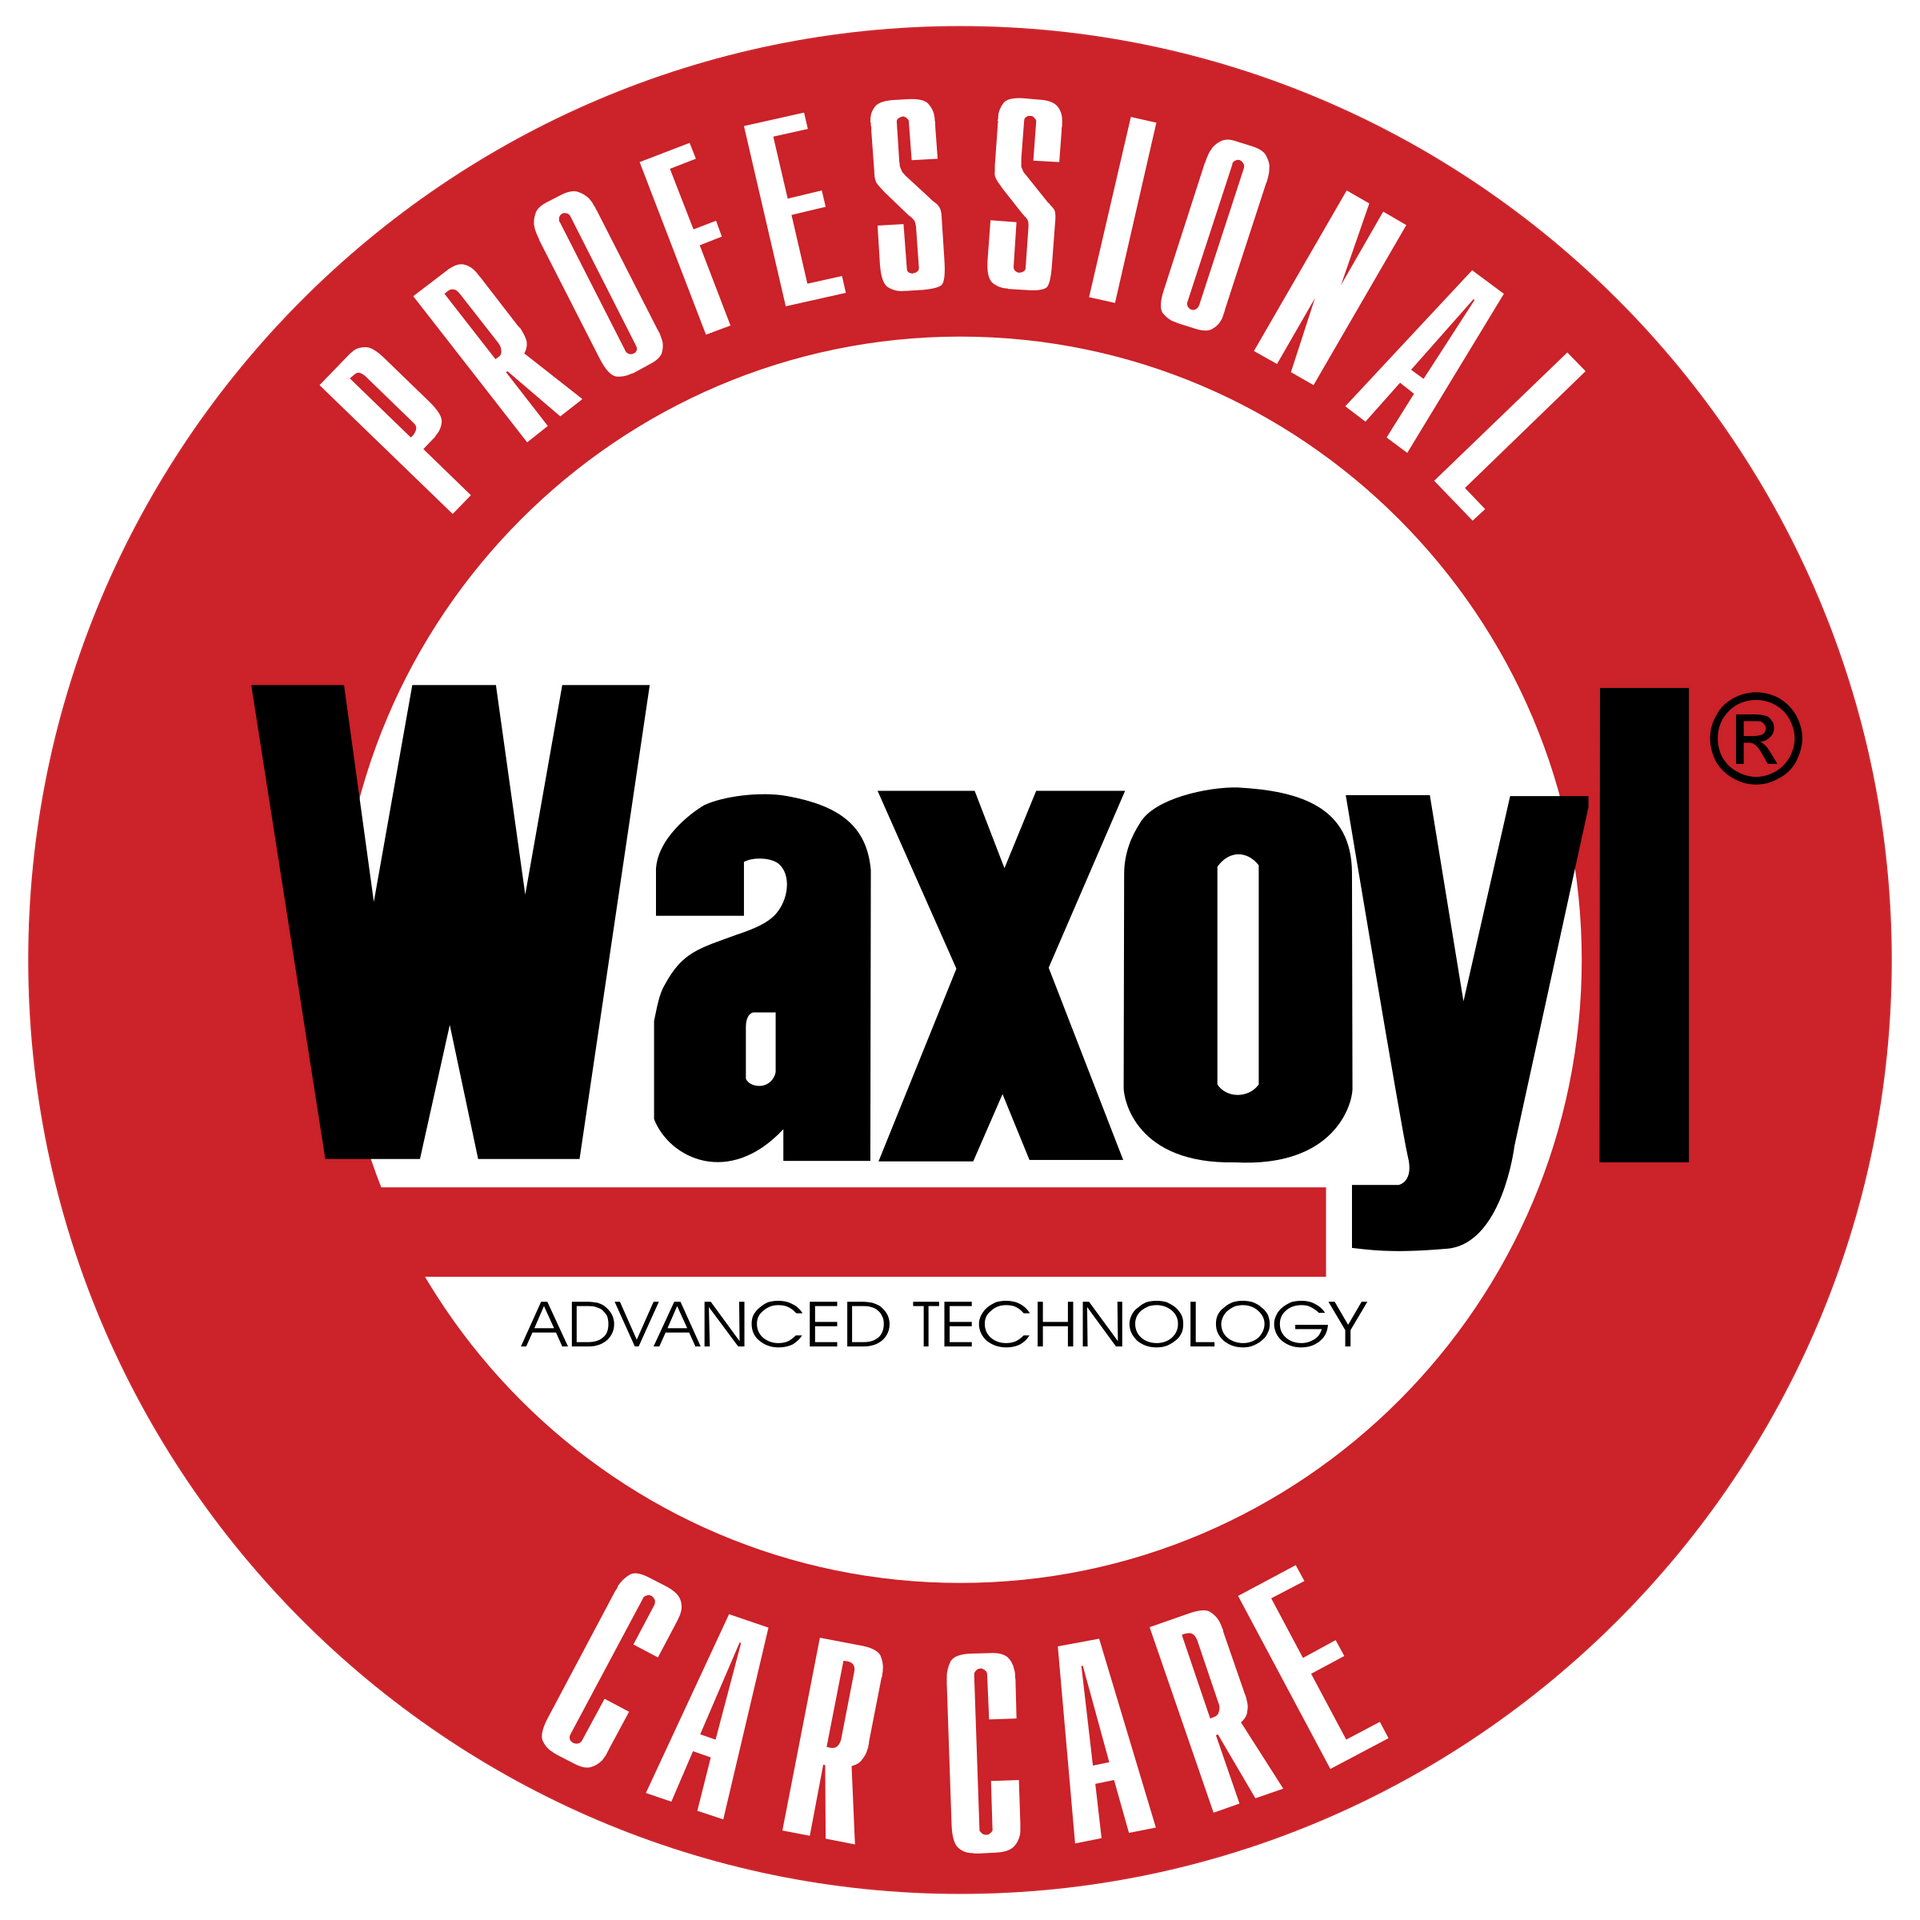 A professional waxoyl car care logo in a red circle